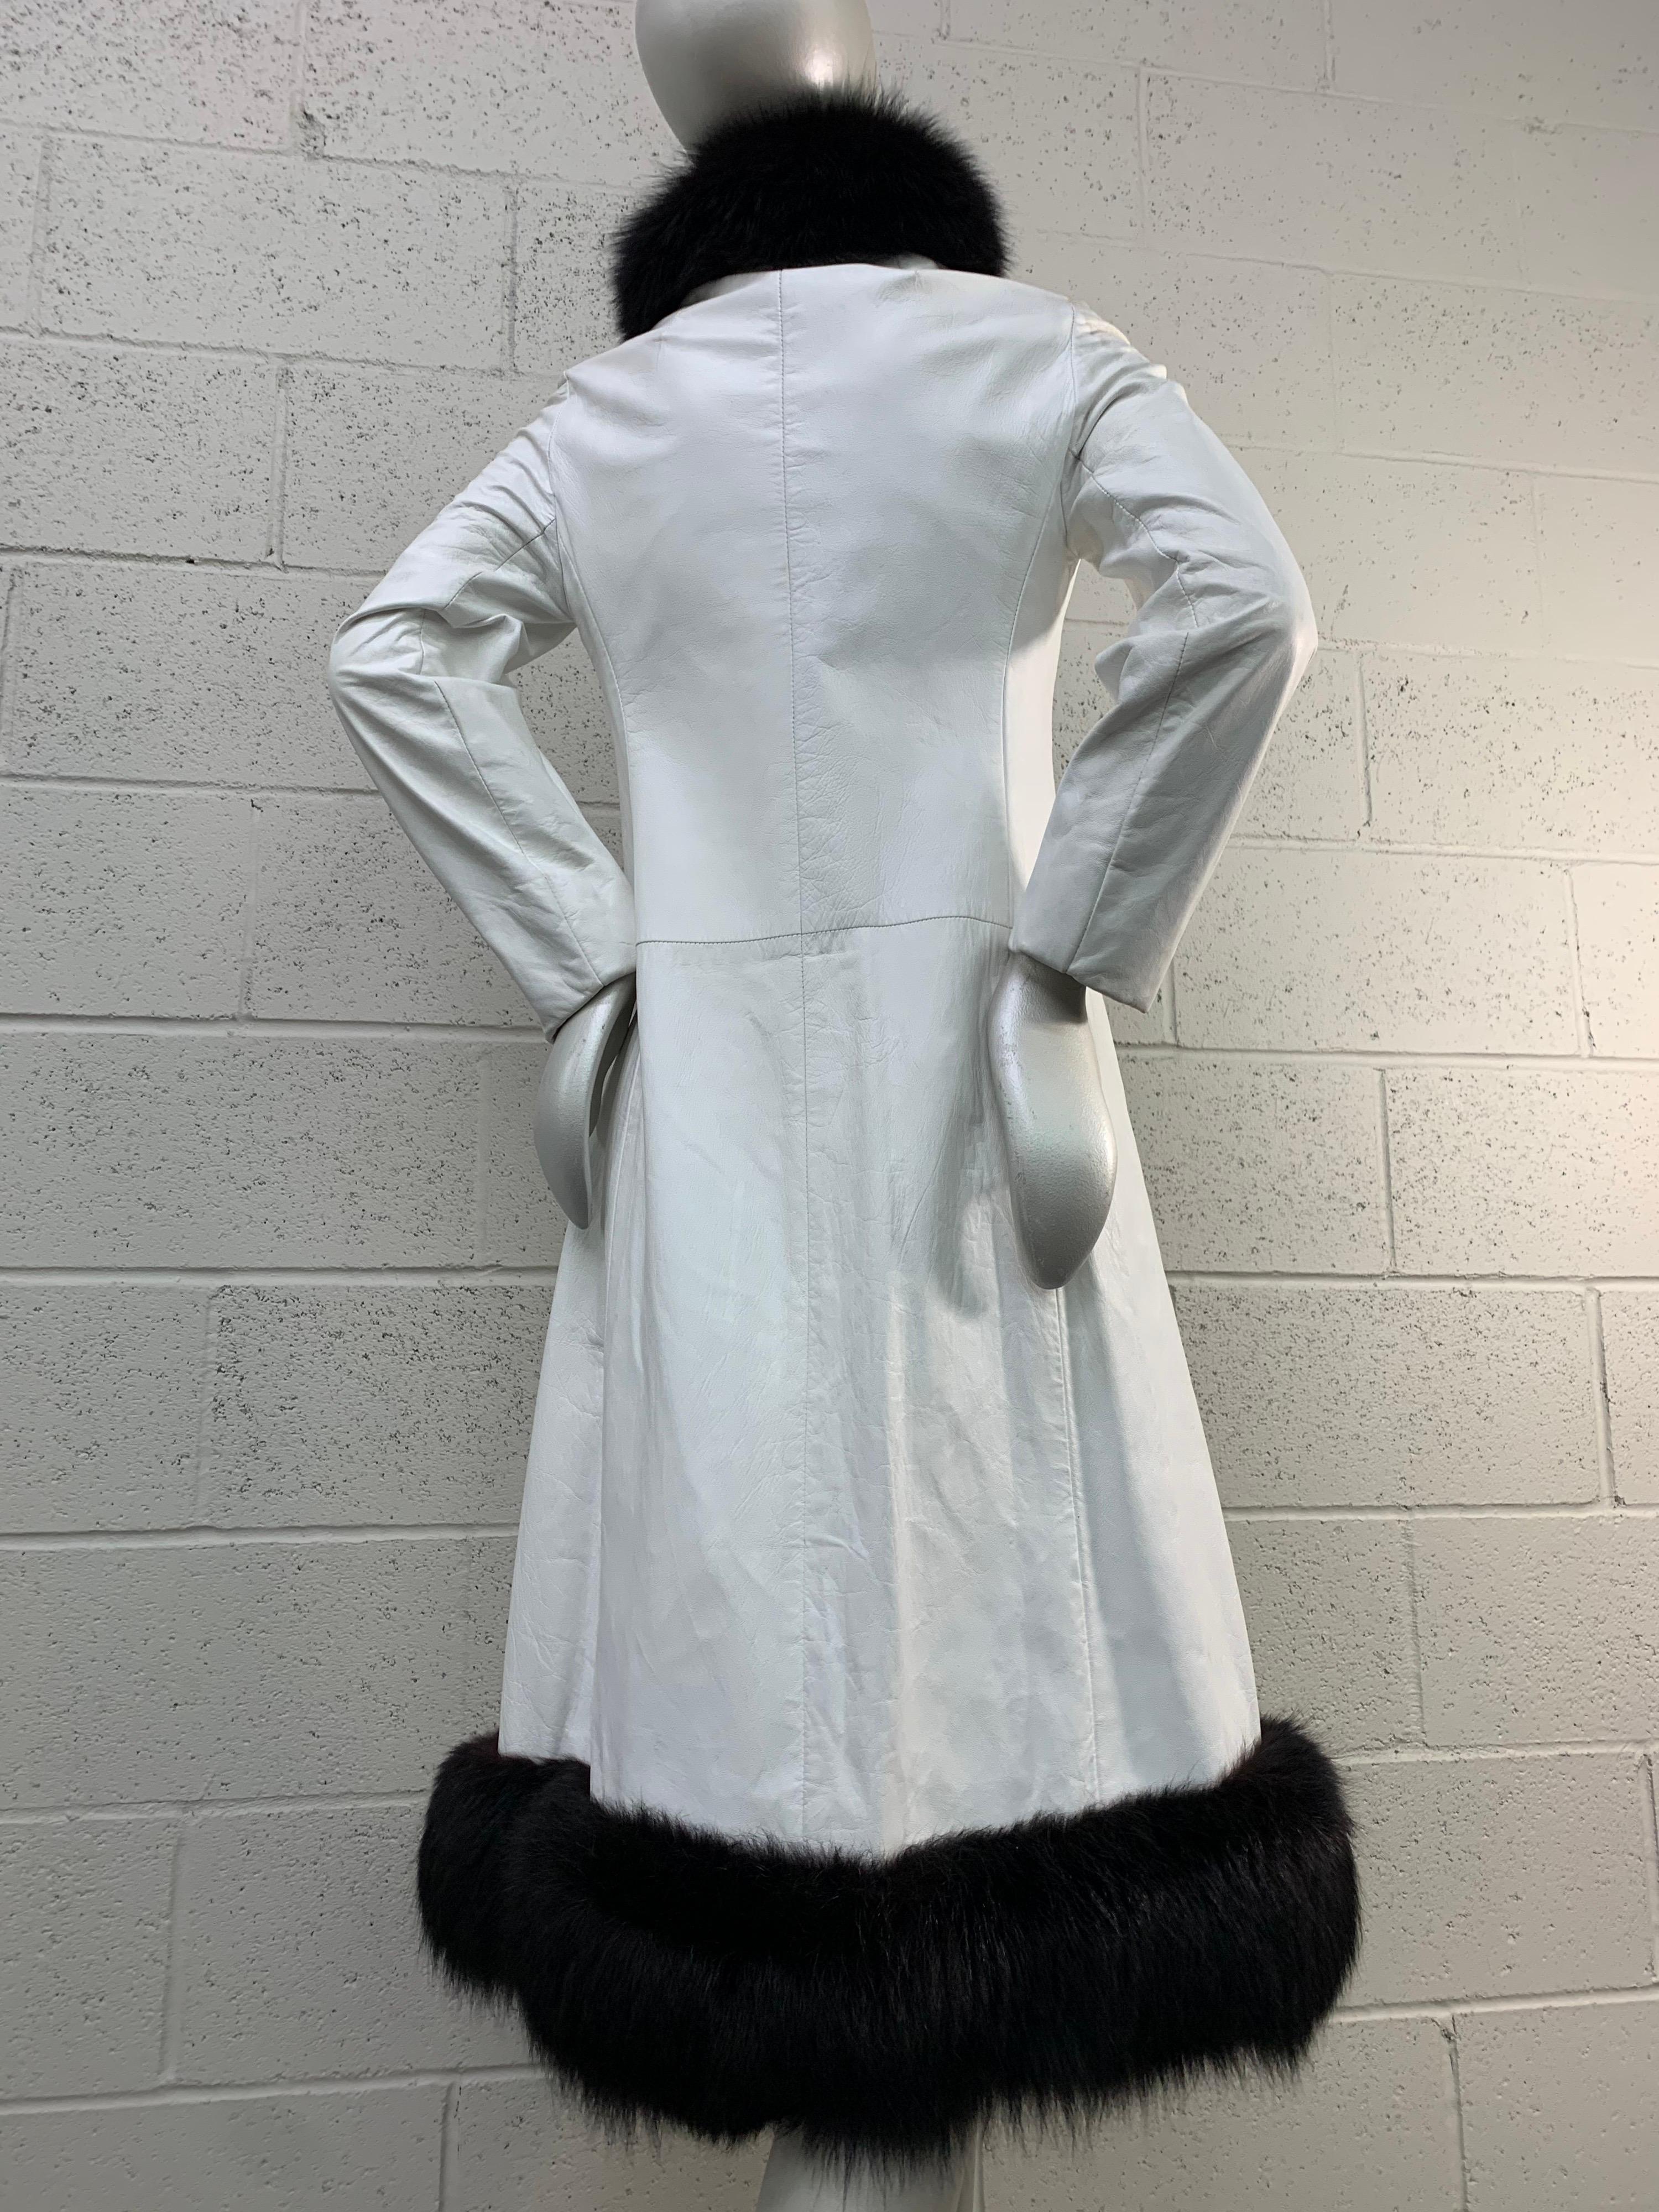 1960s White Leather Princess Coat w/ Black Crewel Embroidery and Fox Trim 1